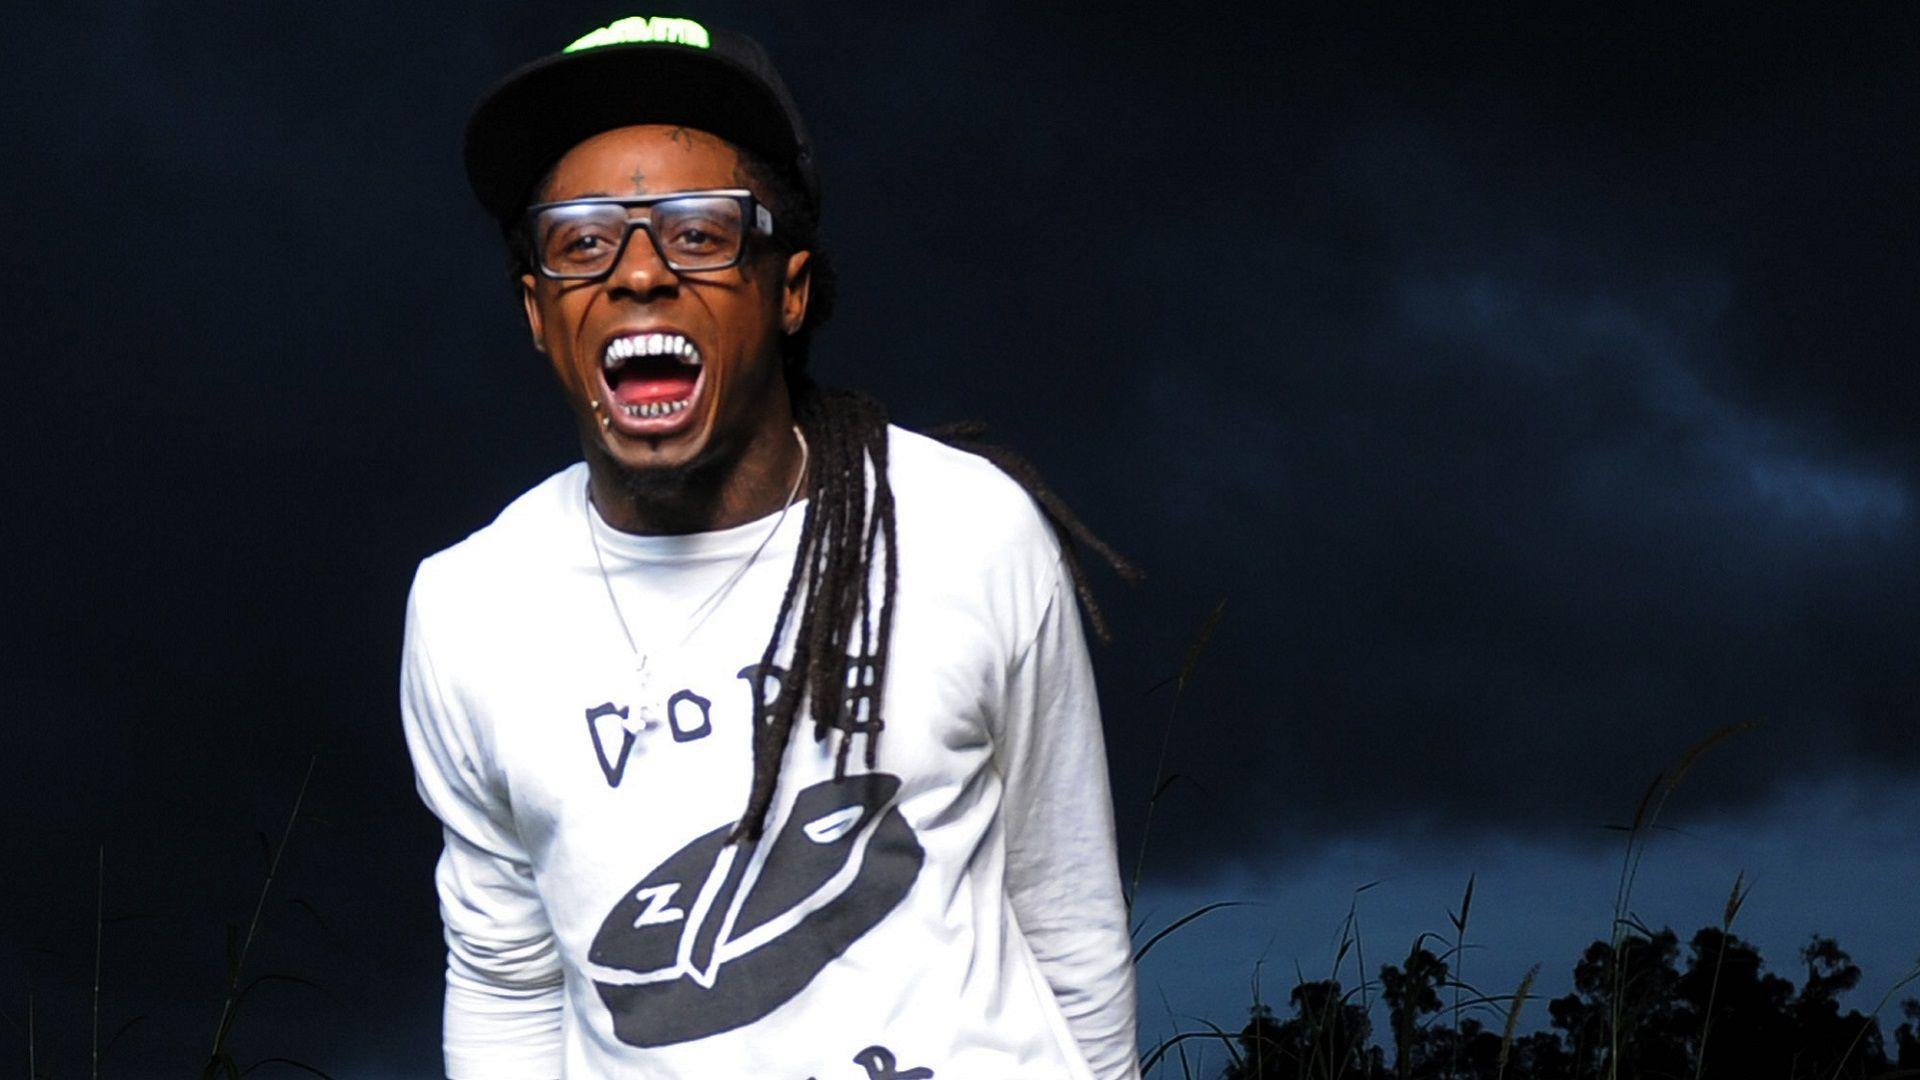 Lil Wayne Wallpaper High Resolution and Quality Download